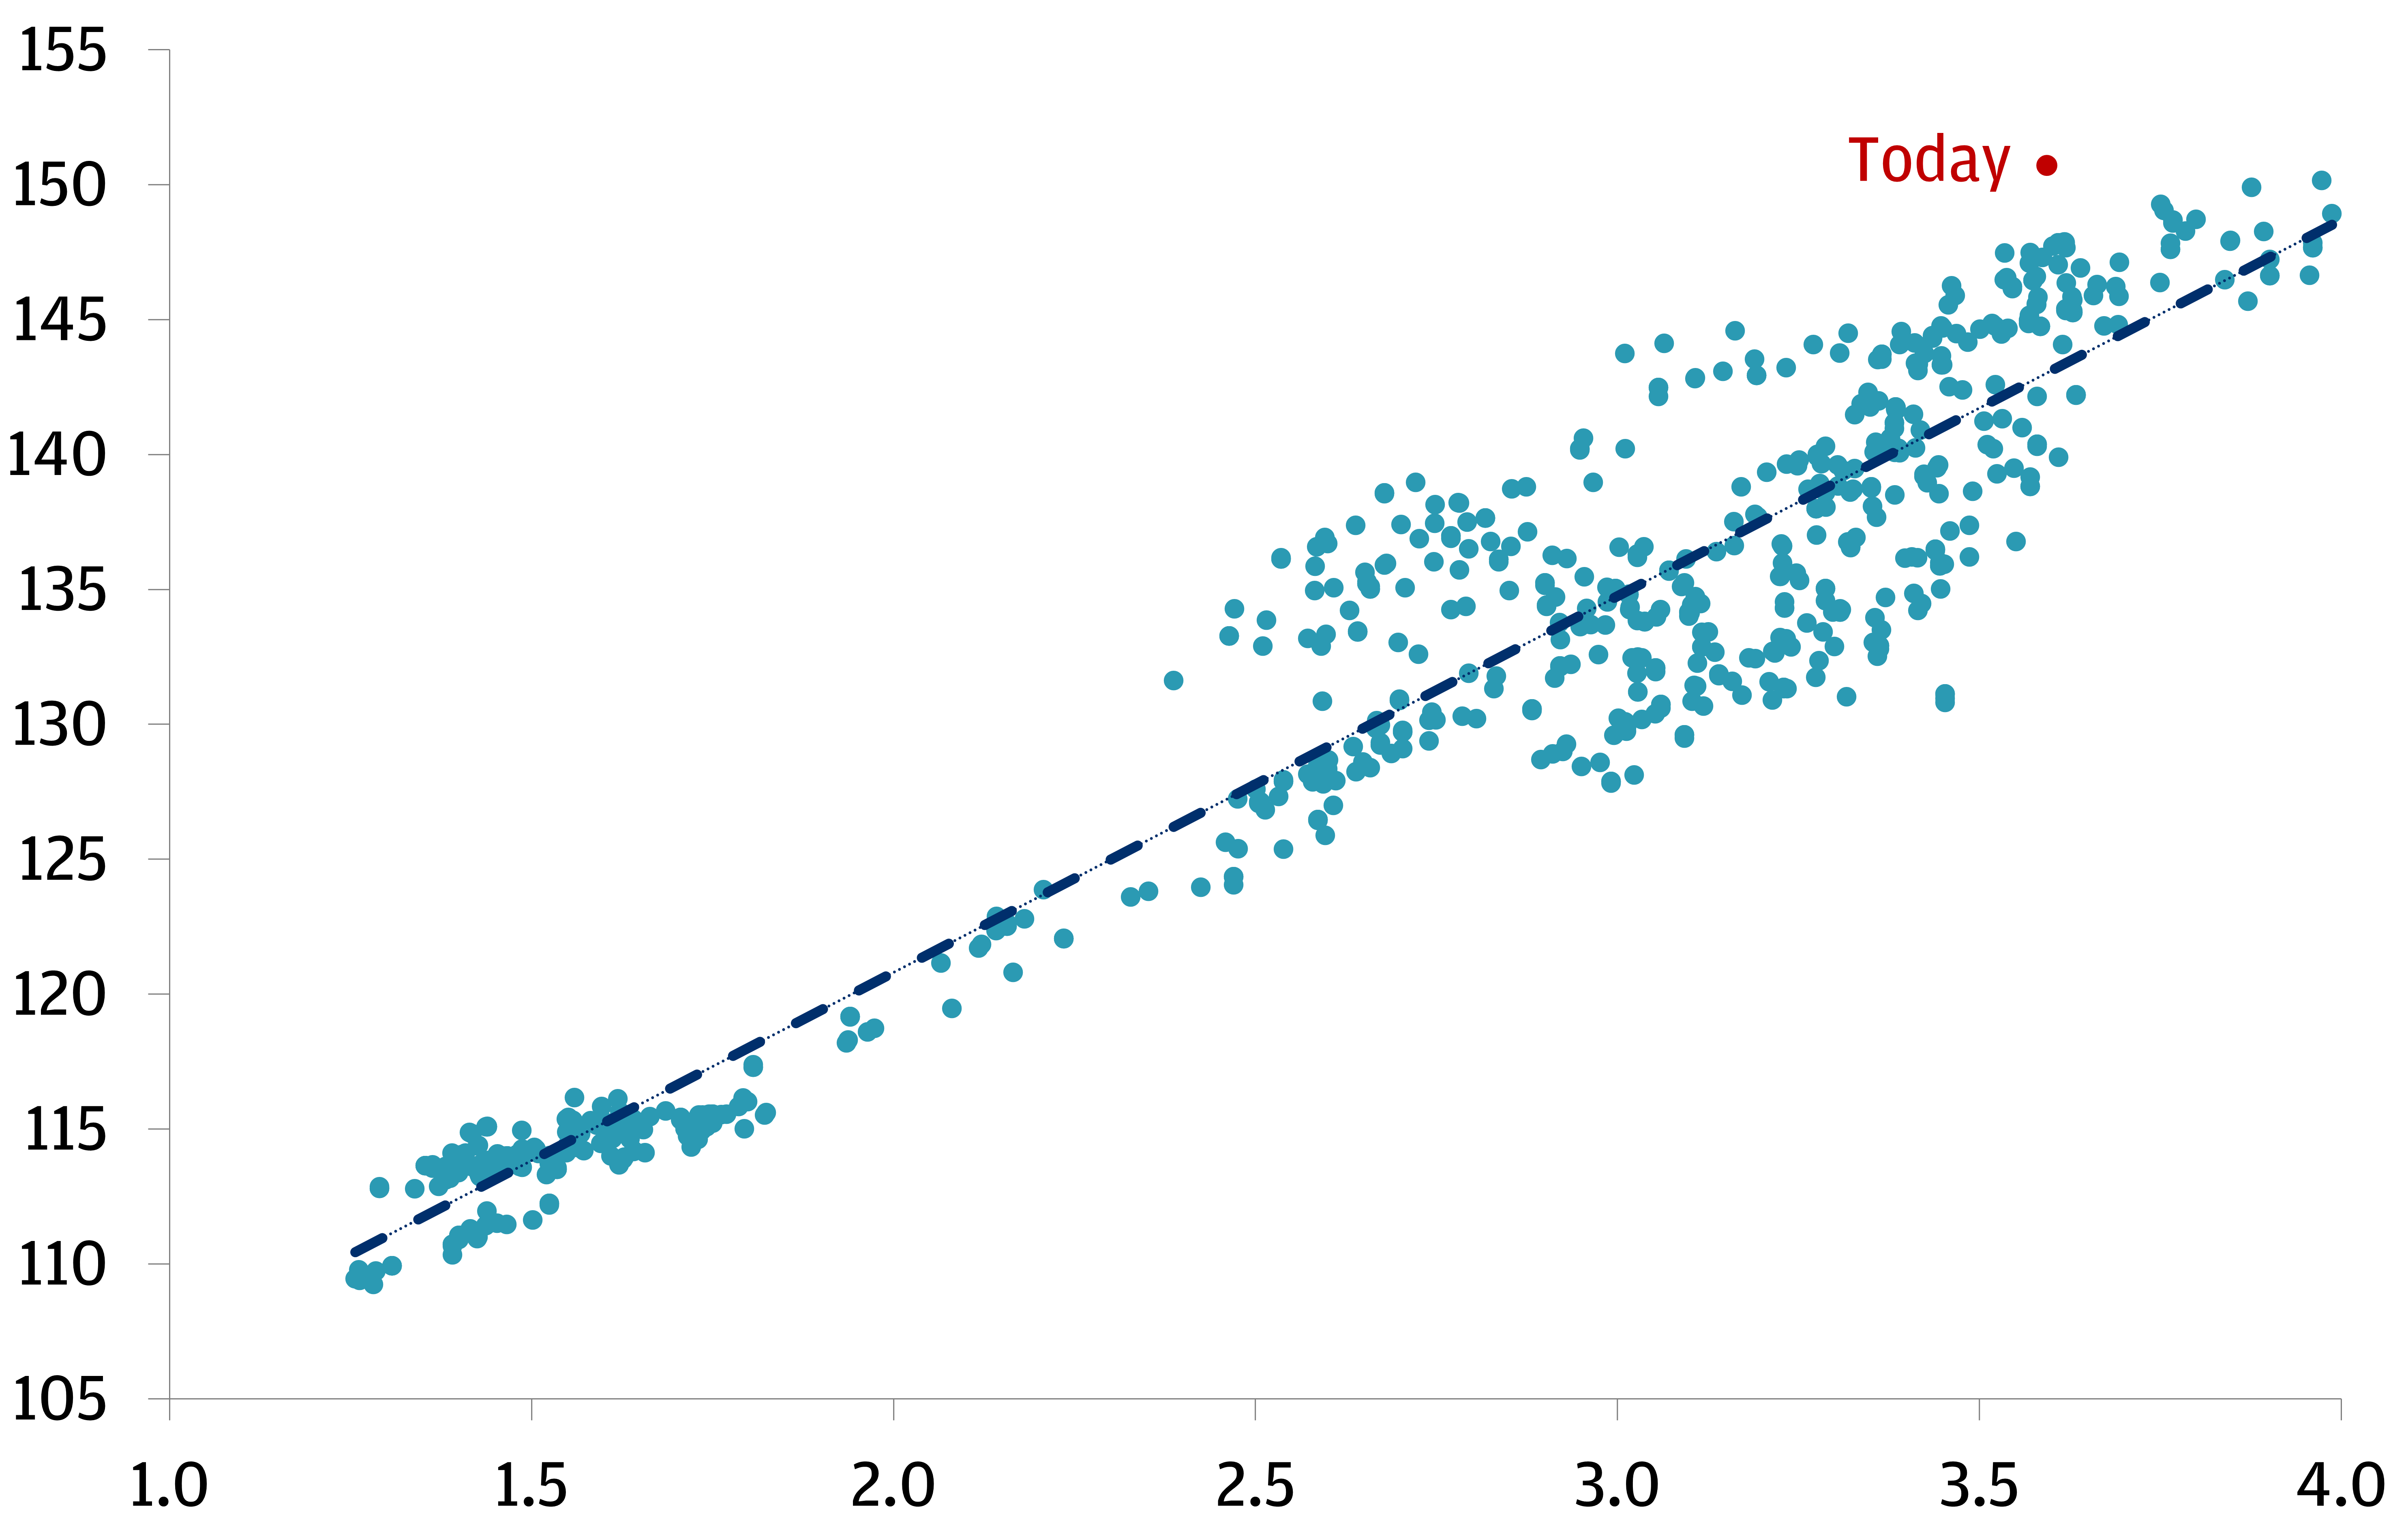 The scatter-plot displays the correlation between the 10-year UST-JGB spread (difference in interest rates between 10-year US Treasury bonds and 10-year Japanese Government Bonds) and the USDJPY exchange rate. Each dot on the chart represents a data point, indicating the values of both variables at a specific time over the past 2 years. 